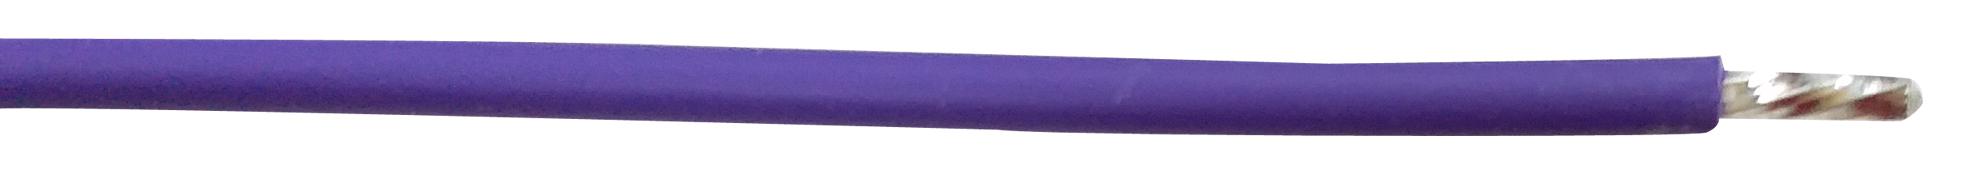 PP002308 HOOK-UP WIRE, 18AWG, PURPLE, 305M, 300V PRO POWER